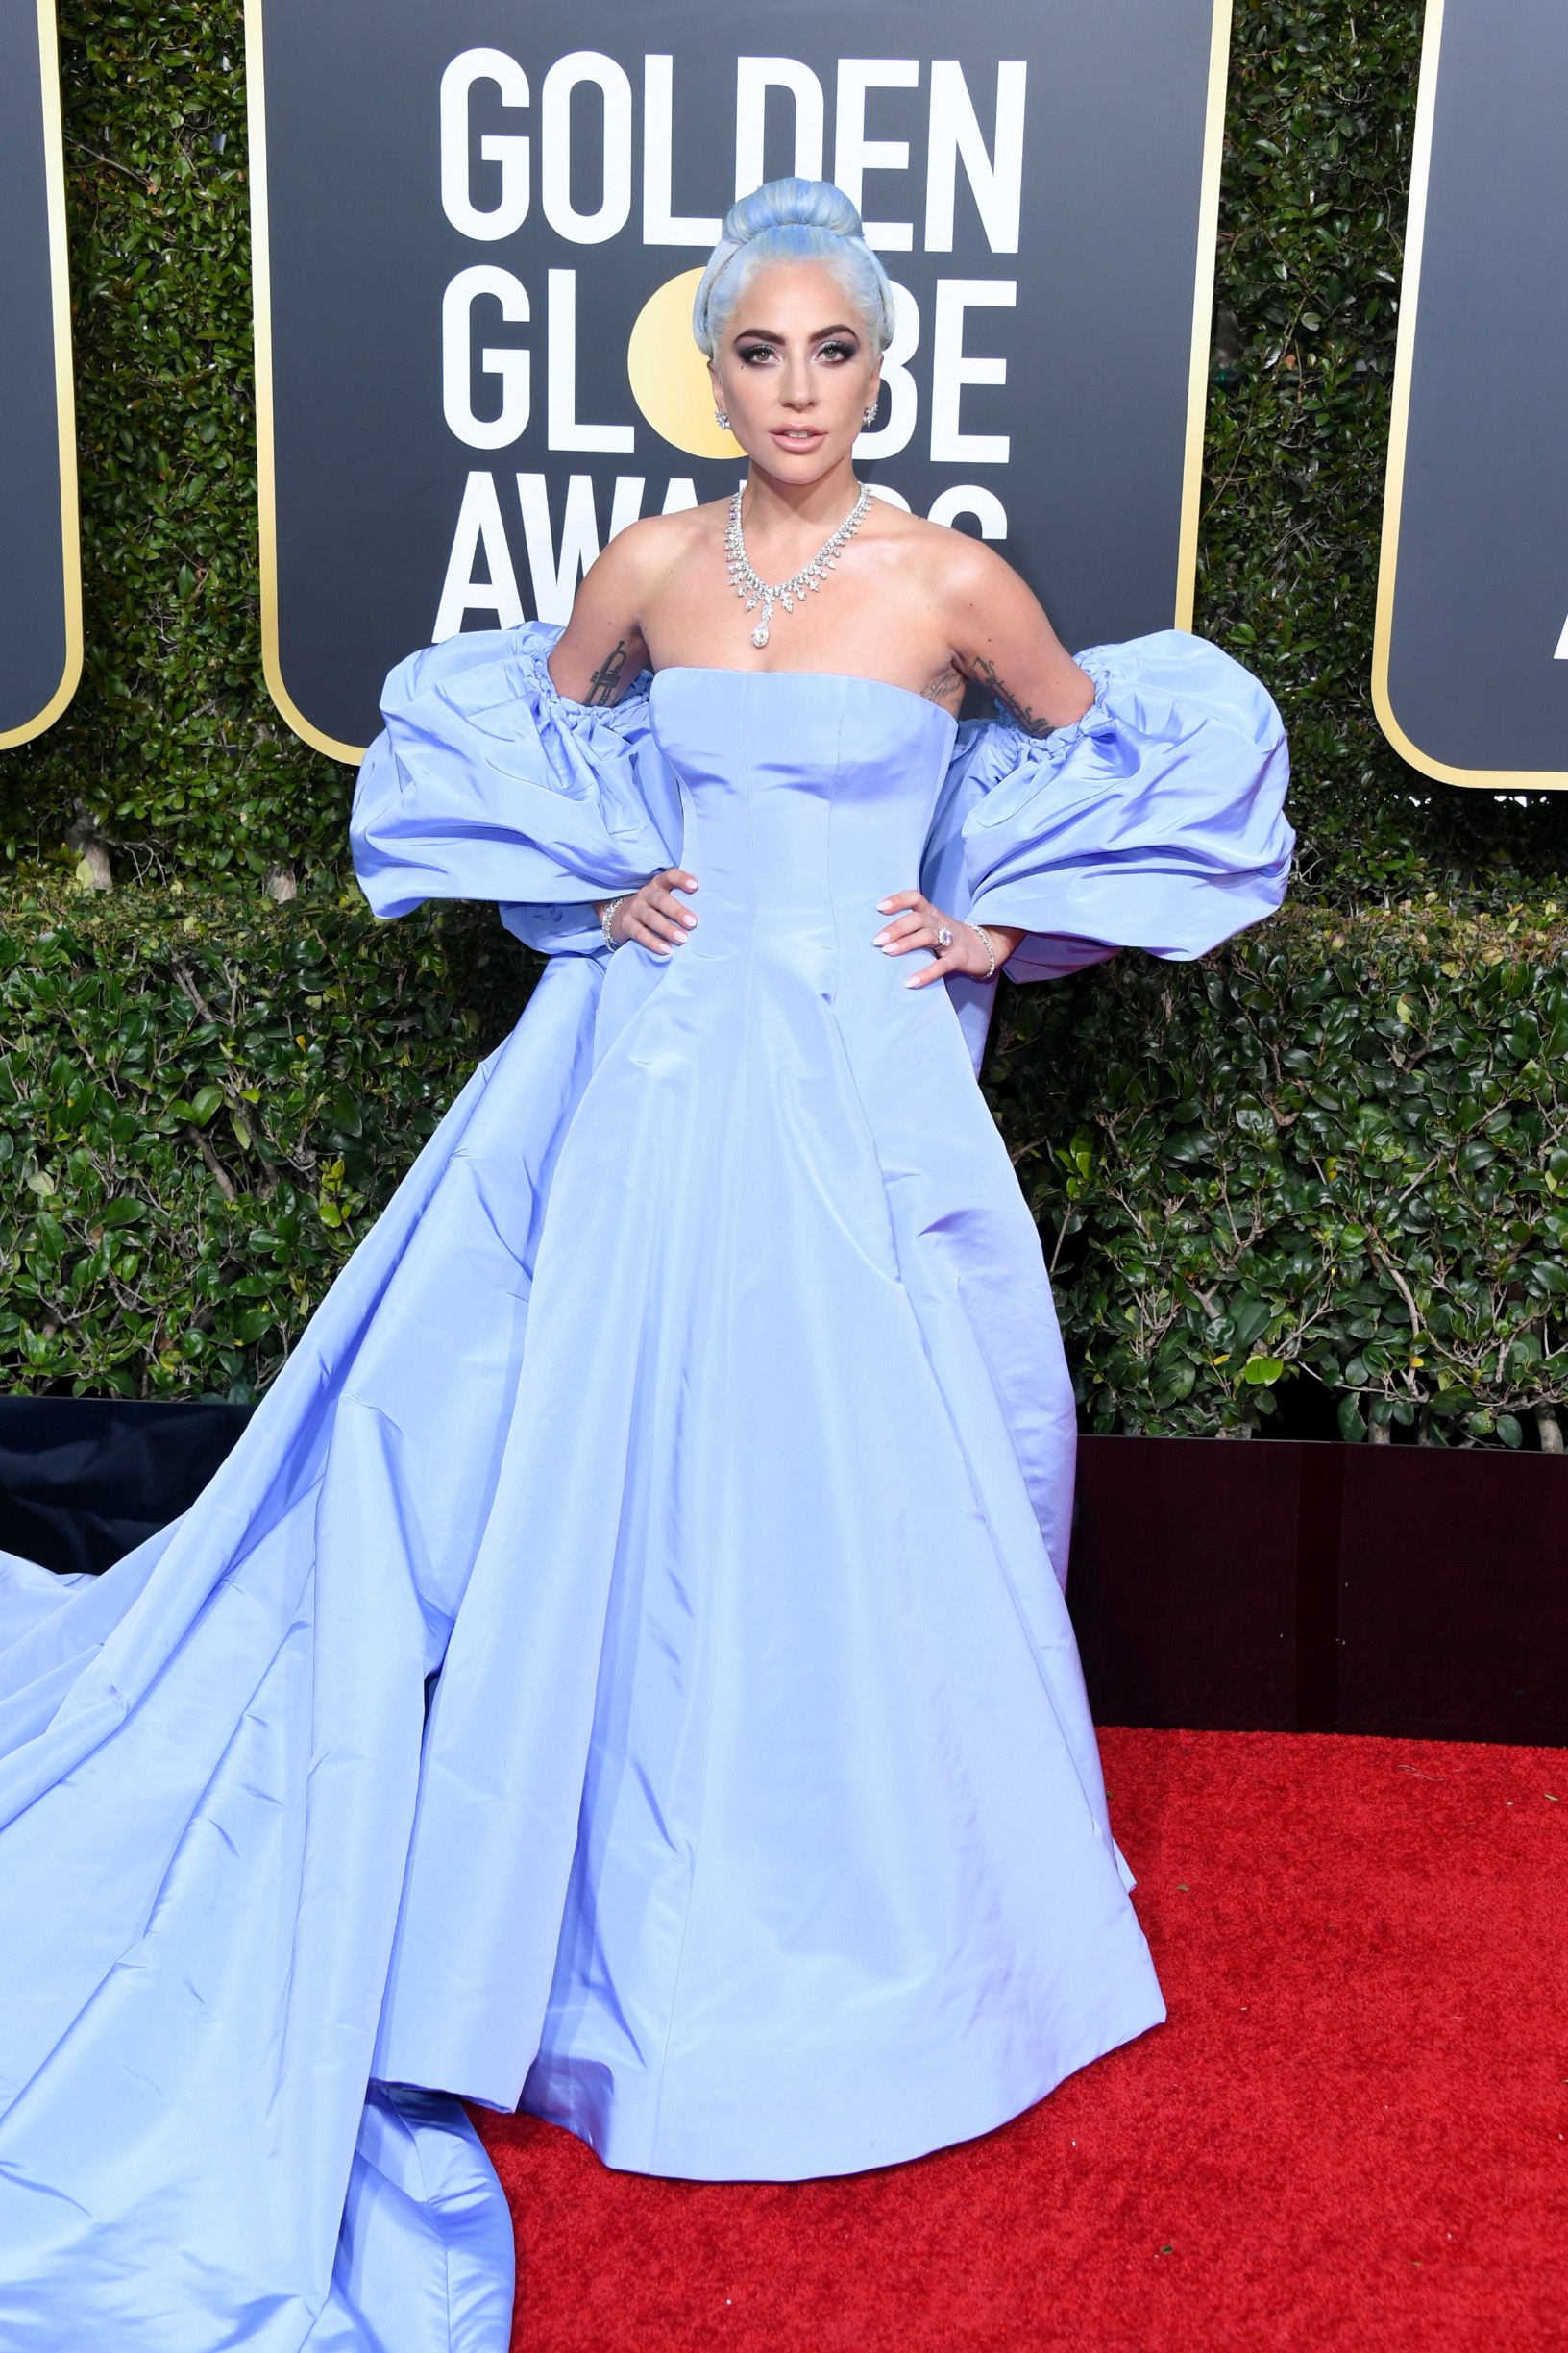 BEVERLY HILLS, CA - JANUARY 06:  Lady Gaga attends the 76th Annual Golden Globe Awards at The Beverly Hilton Hotel on January 6, 2019 in Beverly Hills, California.  (Photo by Jon Kopaloff/Getty Images)